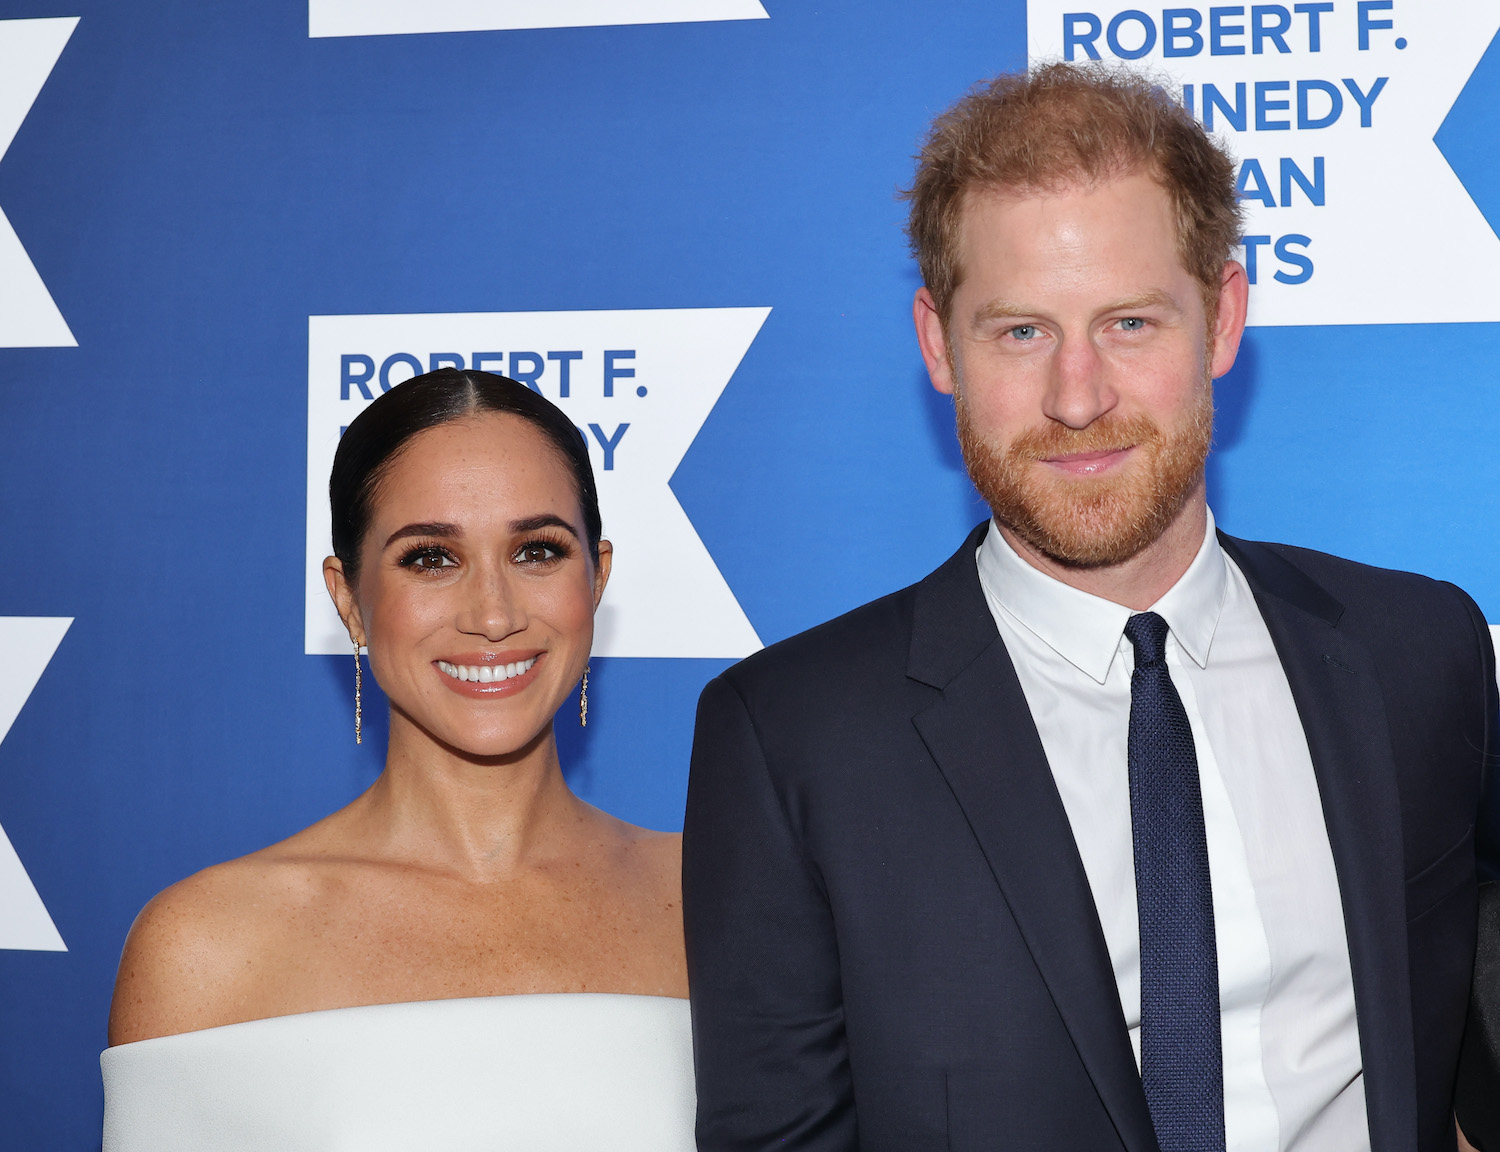 Prince Harry and Meghan Markle's body language at the Ripple of Hope Awards conveyed confidence and excitement